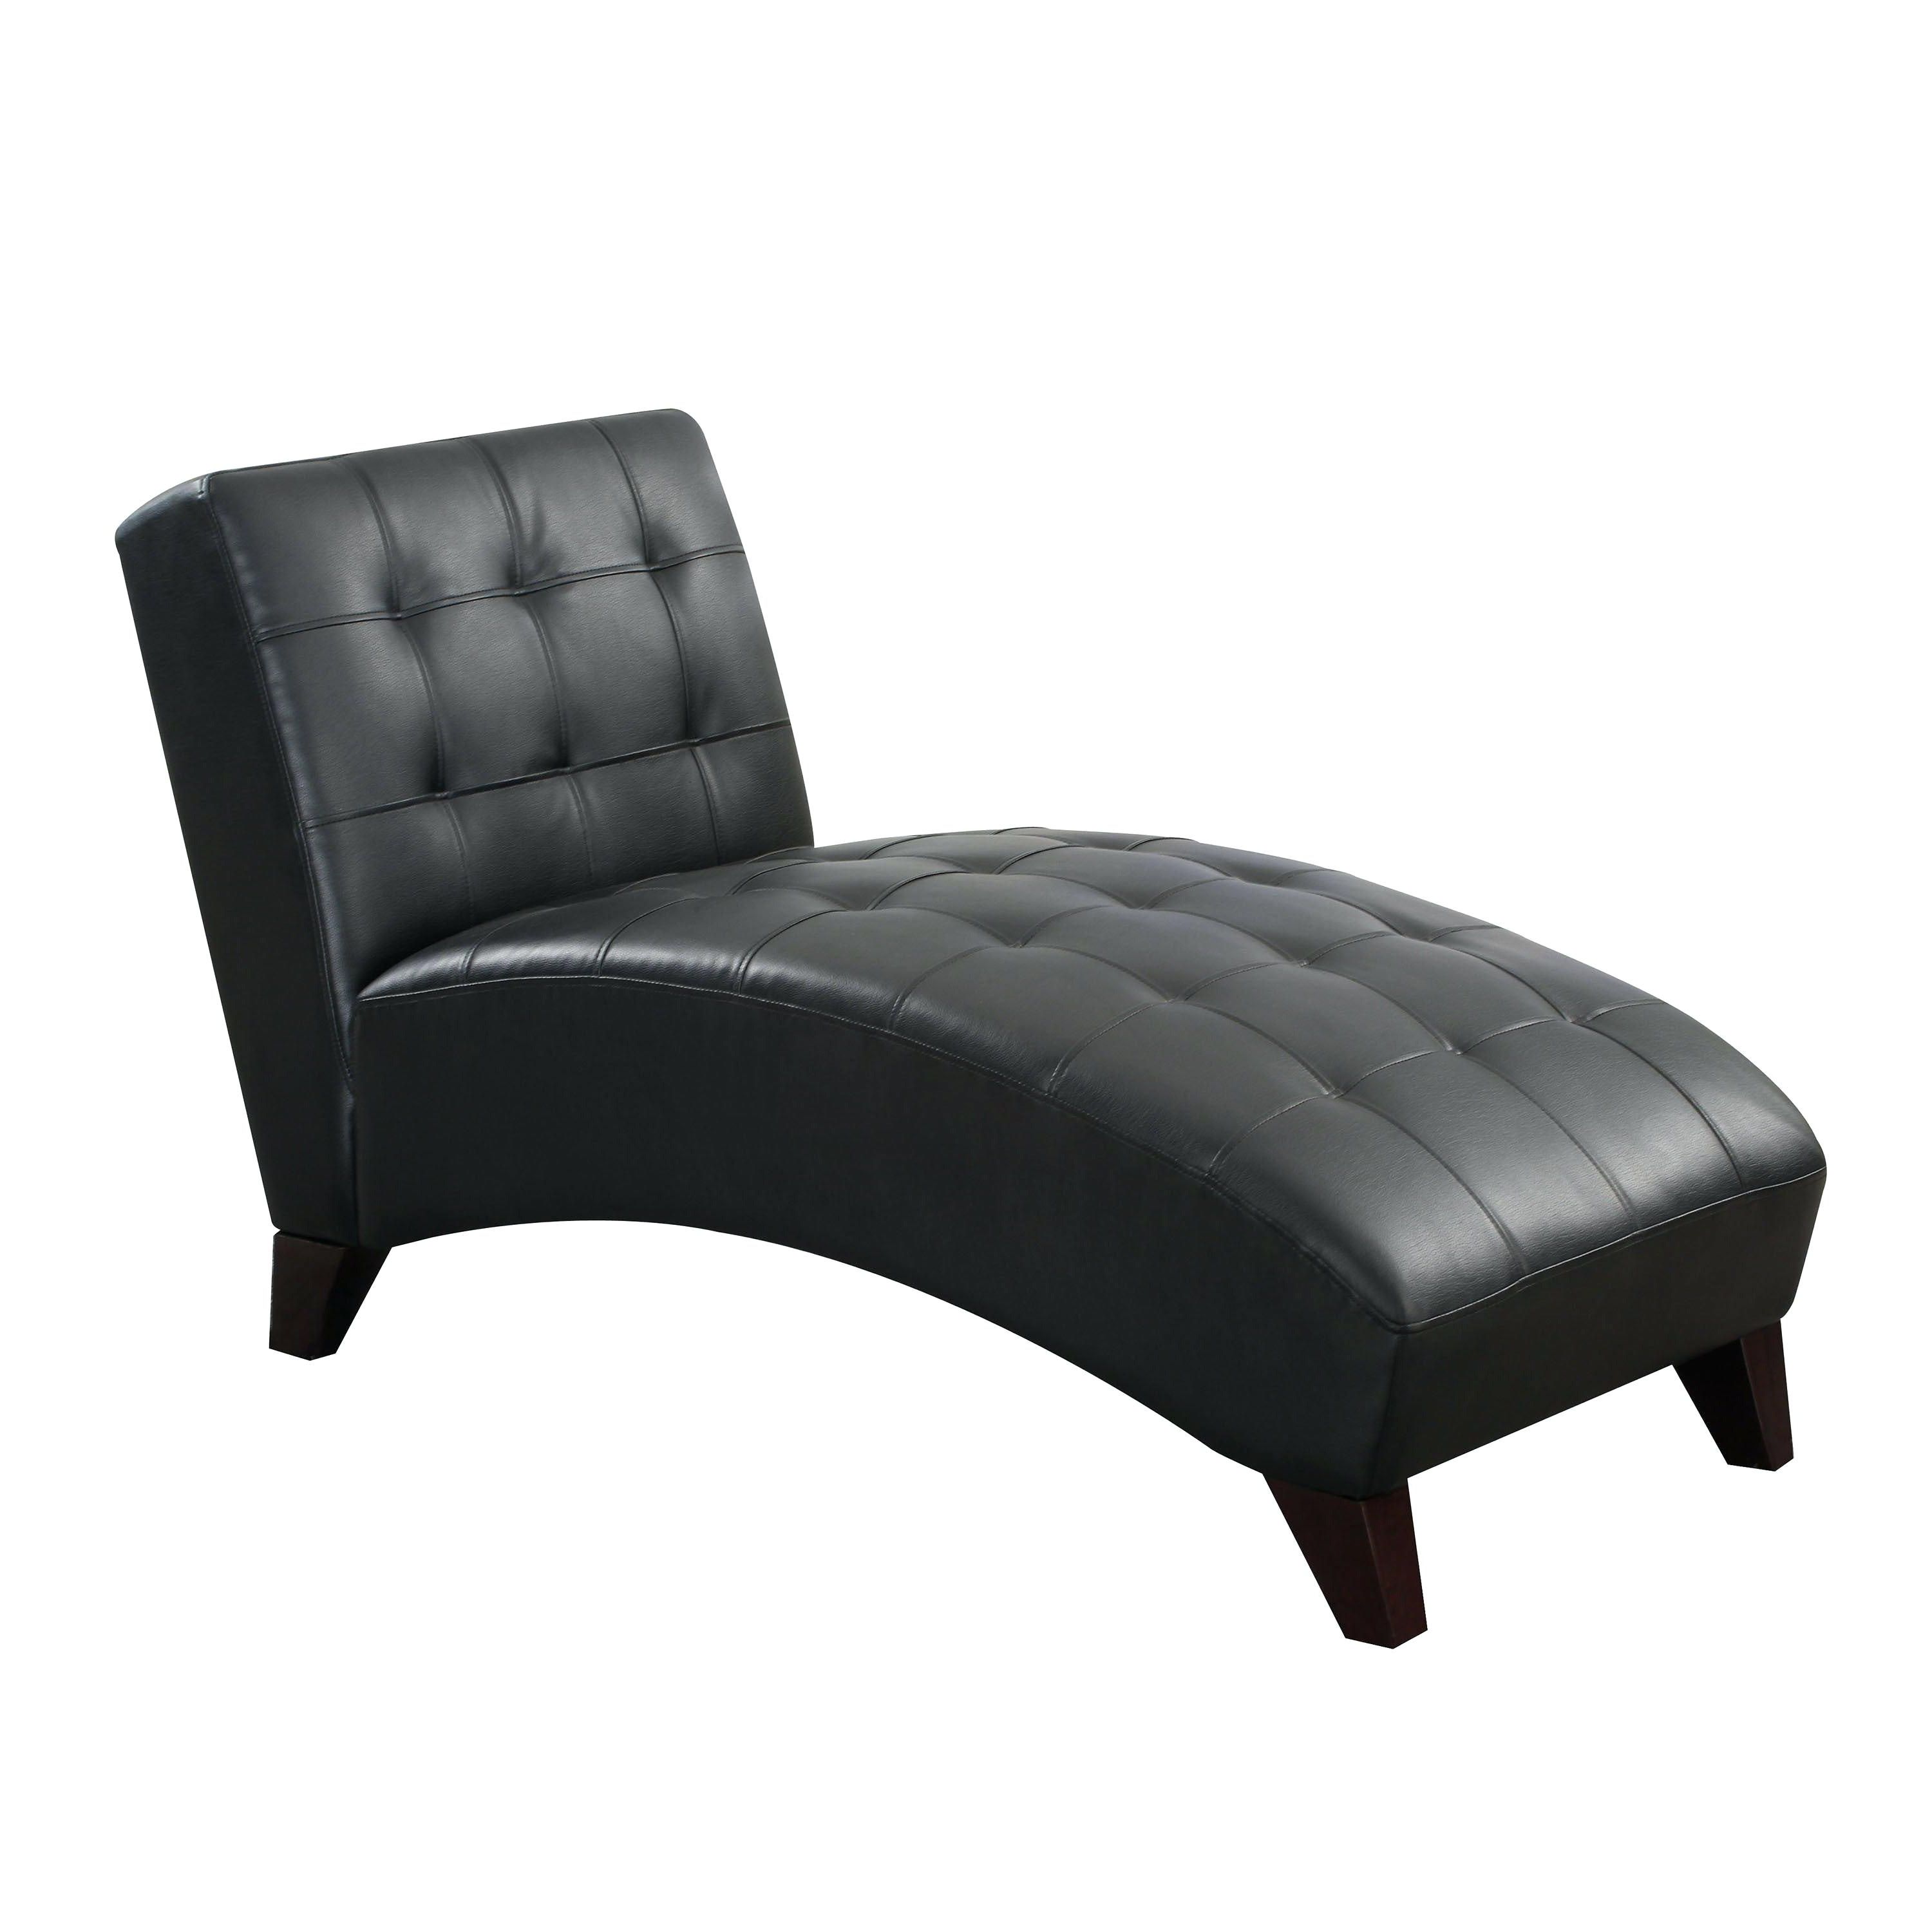 Black Chaise Lounge Chair Leatherfor 1 Iron Chairs Throughout Most Up To Date Biscayne White Chaise Lounge Chairs (View 16 of 25)